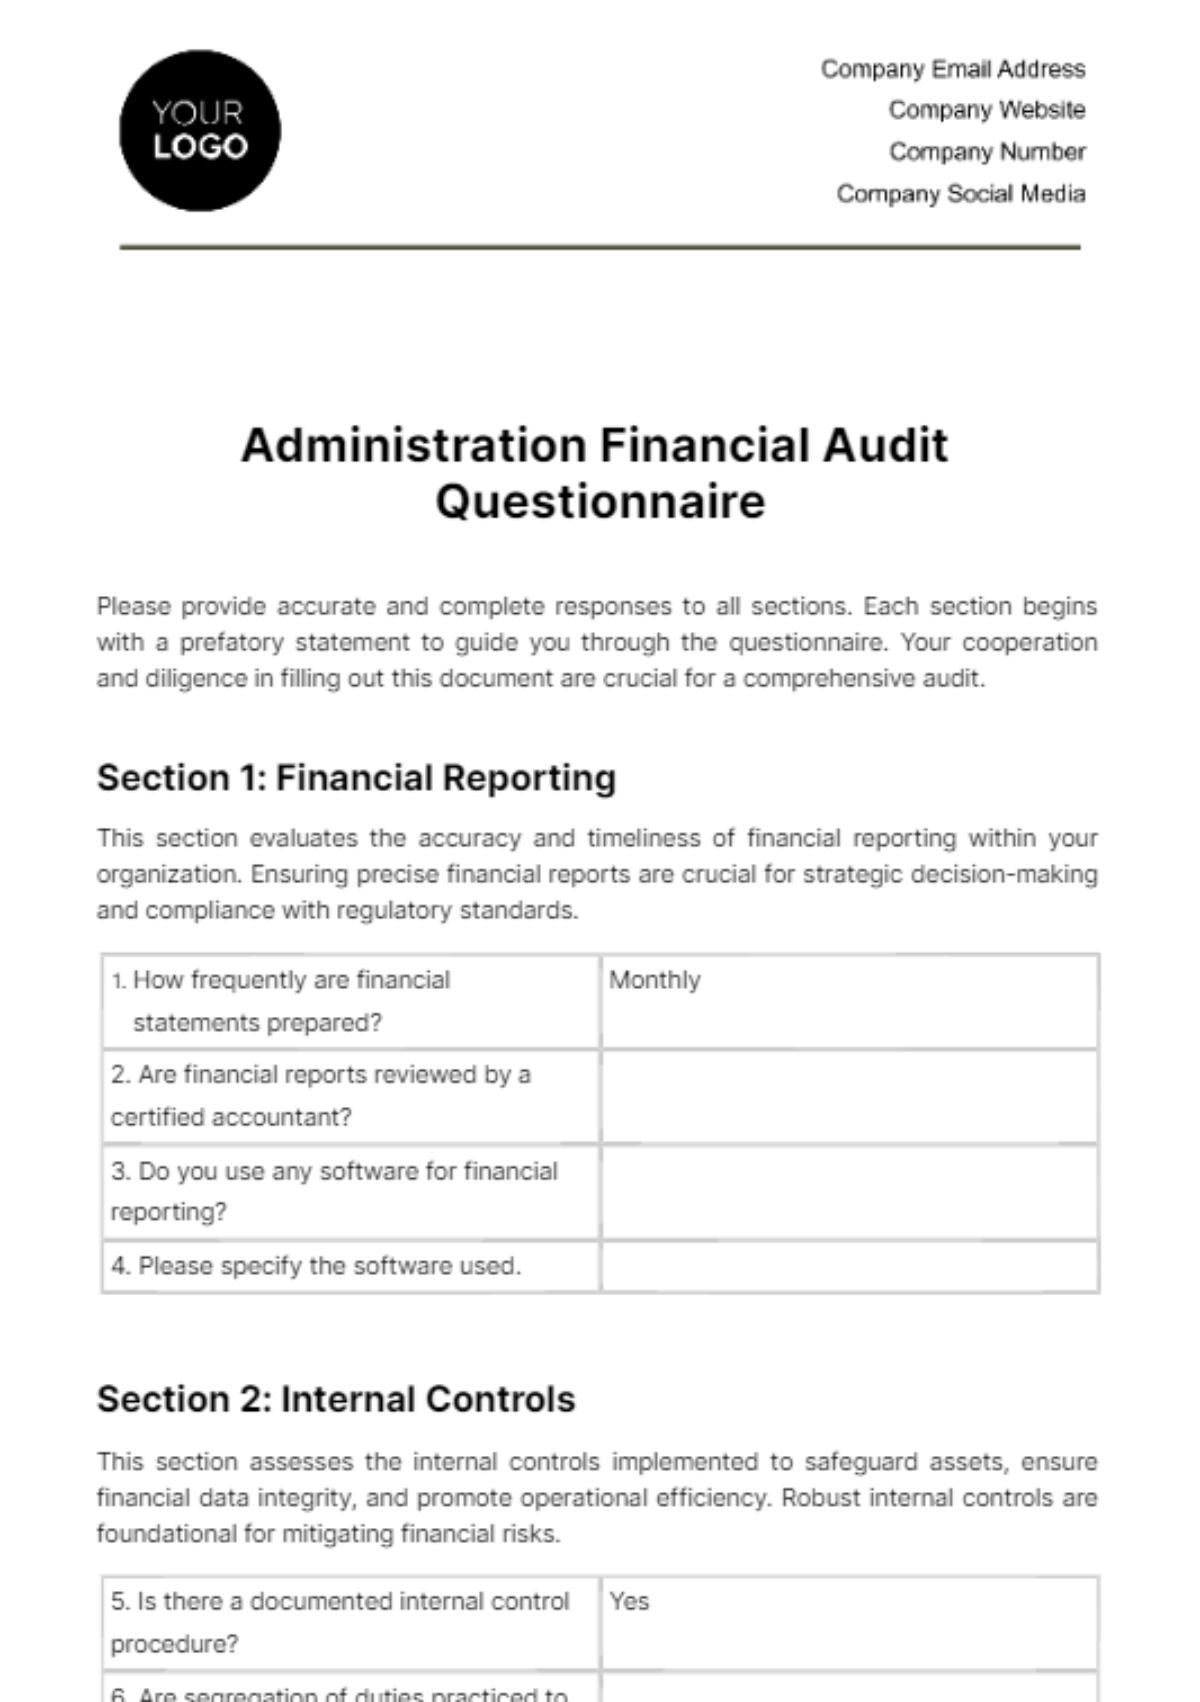 Free Administration Financial Audit Questionnaire Template